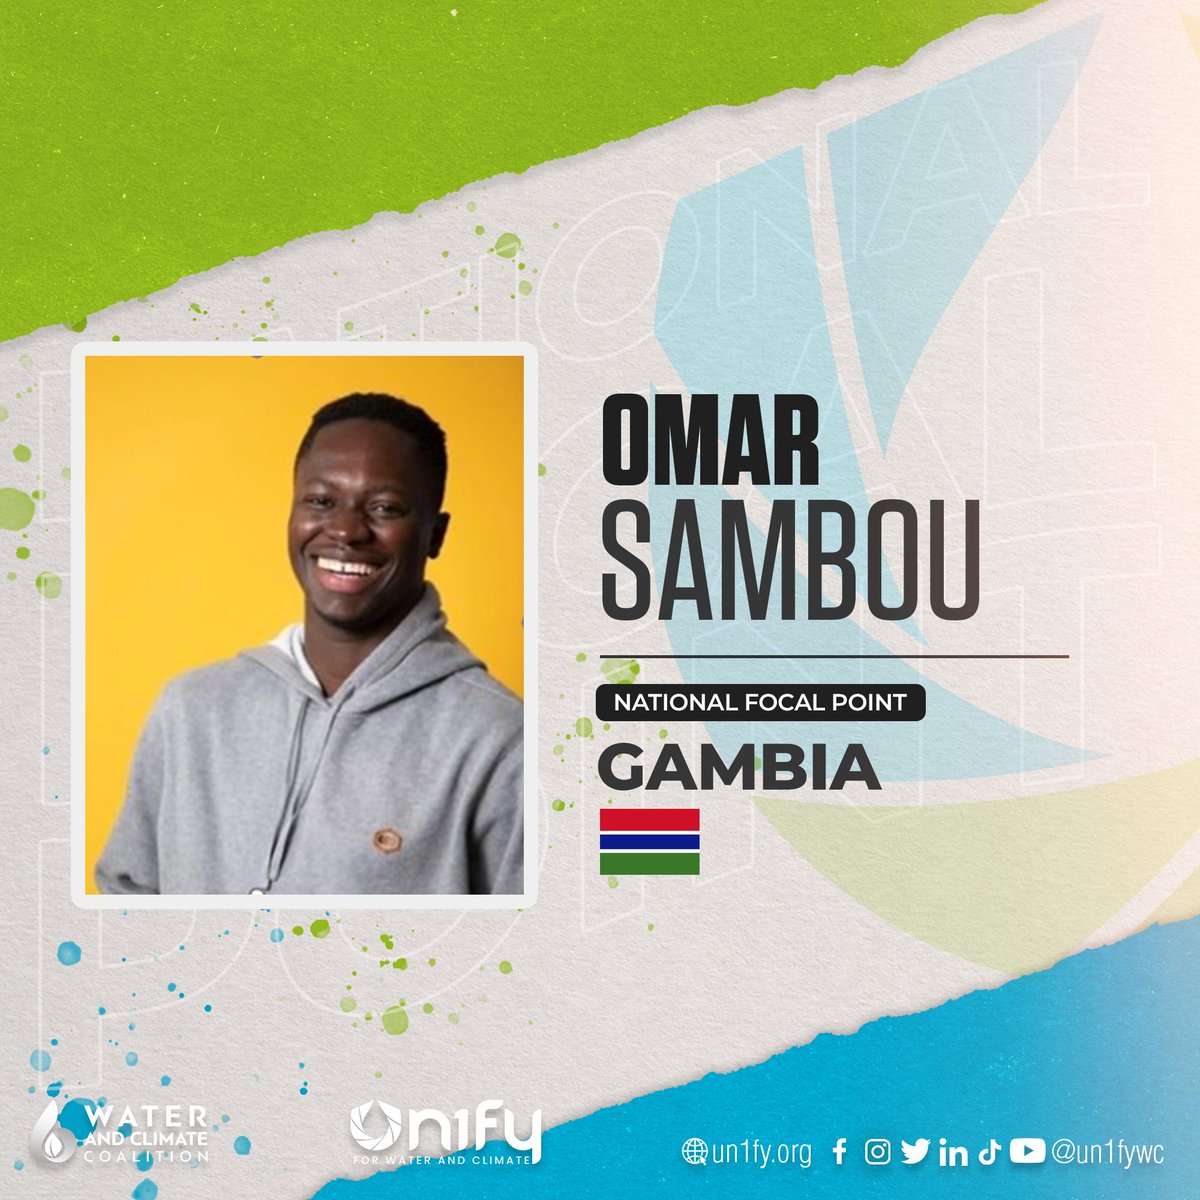 Introducing our National Focal Points for Gambia, Dawda Cham and Omar Sambou. Are you from Gambia and willing to advocate for water and climate? You can reach them via email at gambia@un1fy.org #un2023waterconference #wateractio #youthadvocates #un1fy #un1fywc